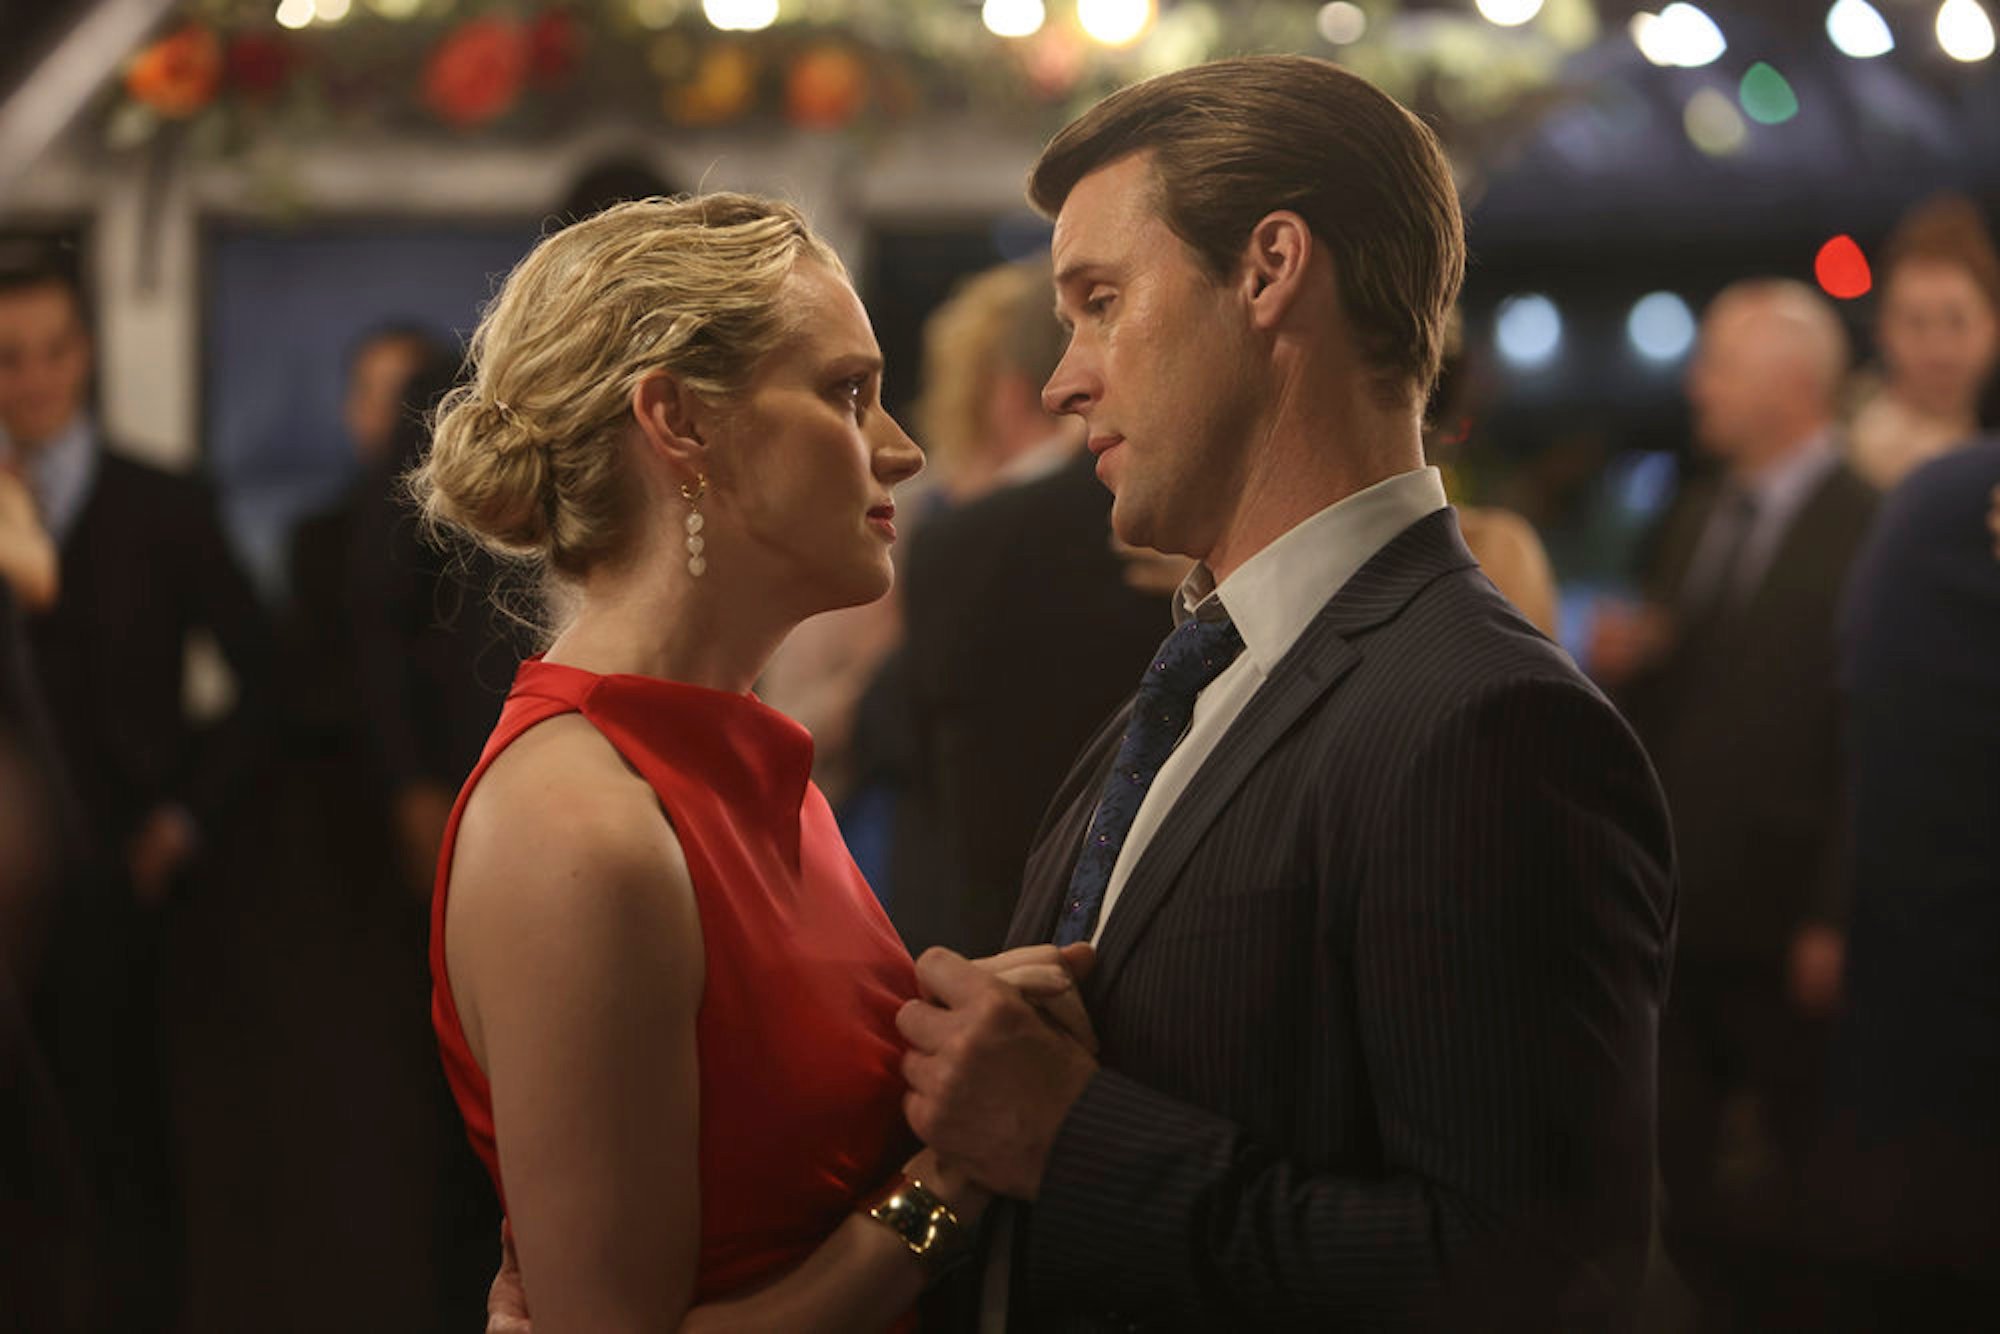 Sylvie Brett and Matt Casey, played by Kara Killmer and Jesse Spencer, dancing together in the 'Chicago Fire' Season 10 finale